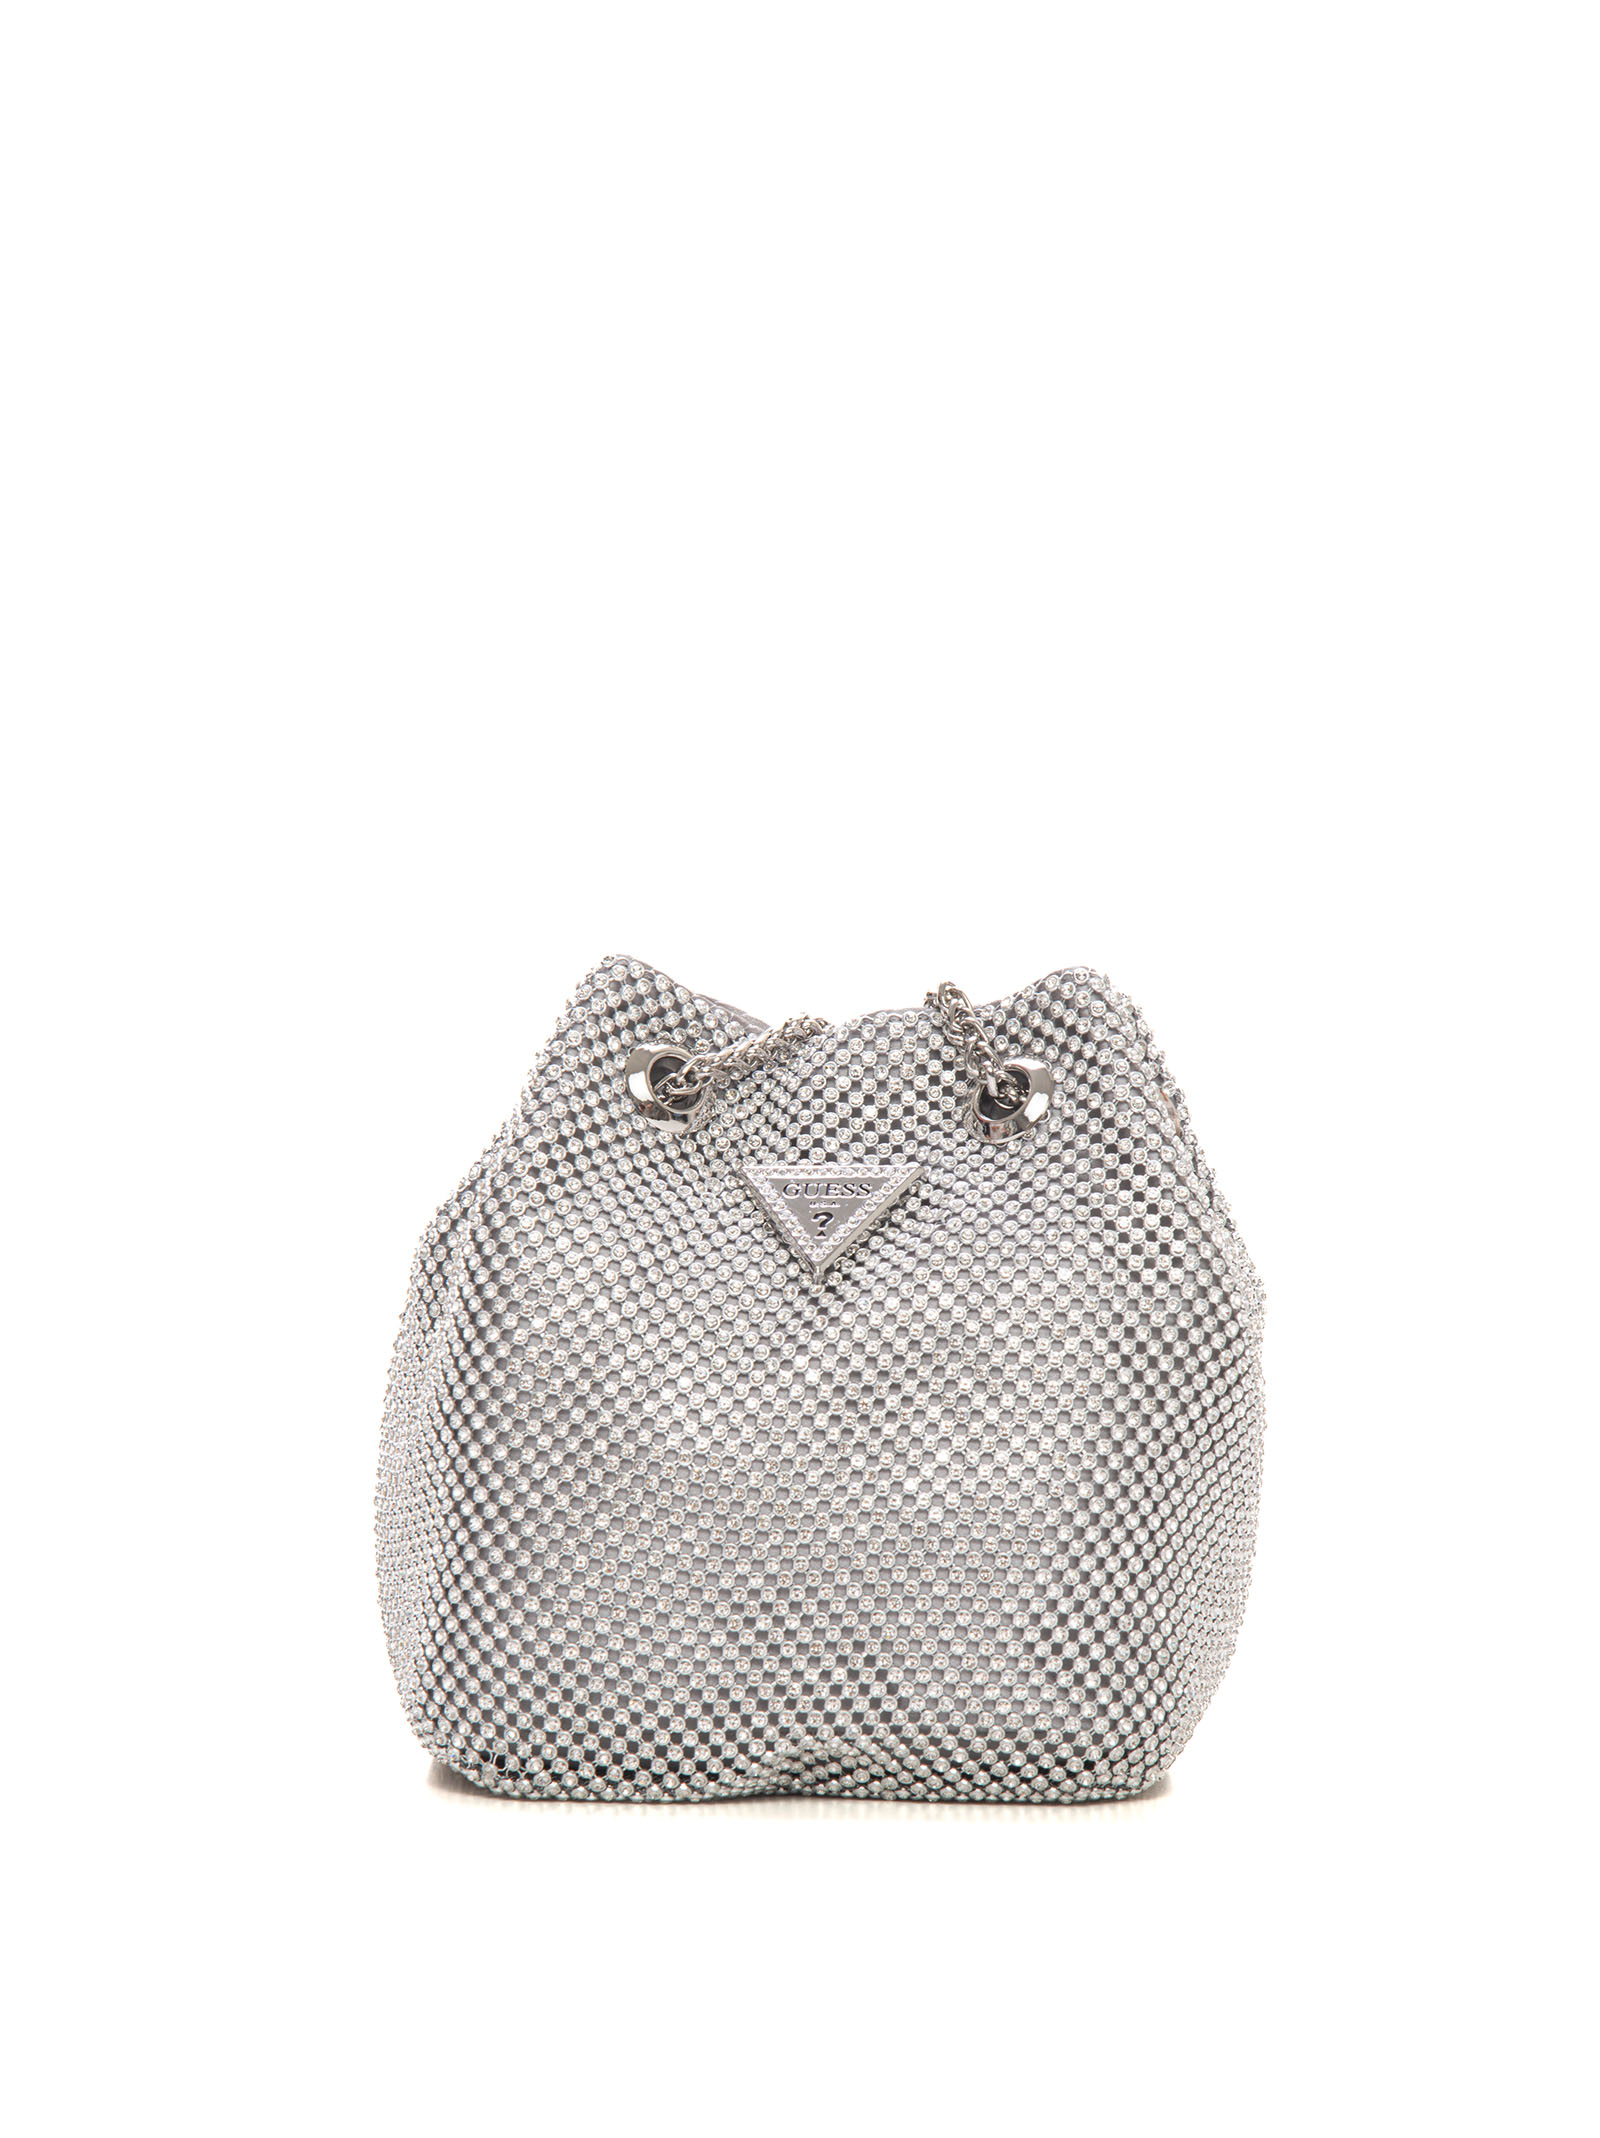 Guess Lua Small Bag In Silver